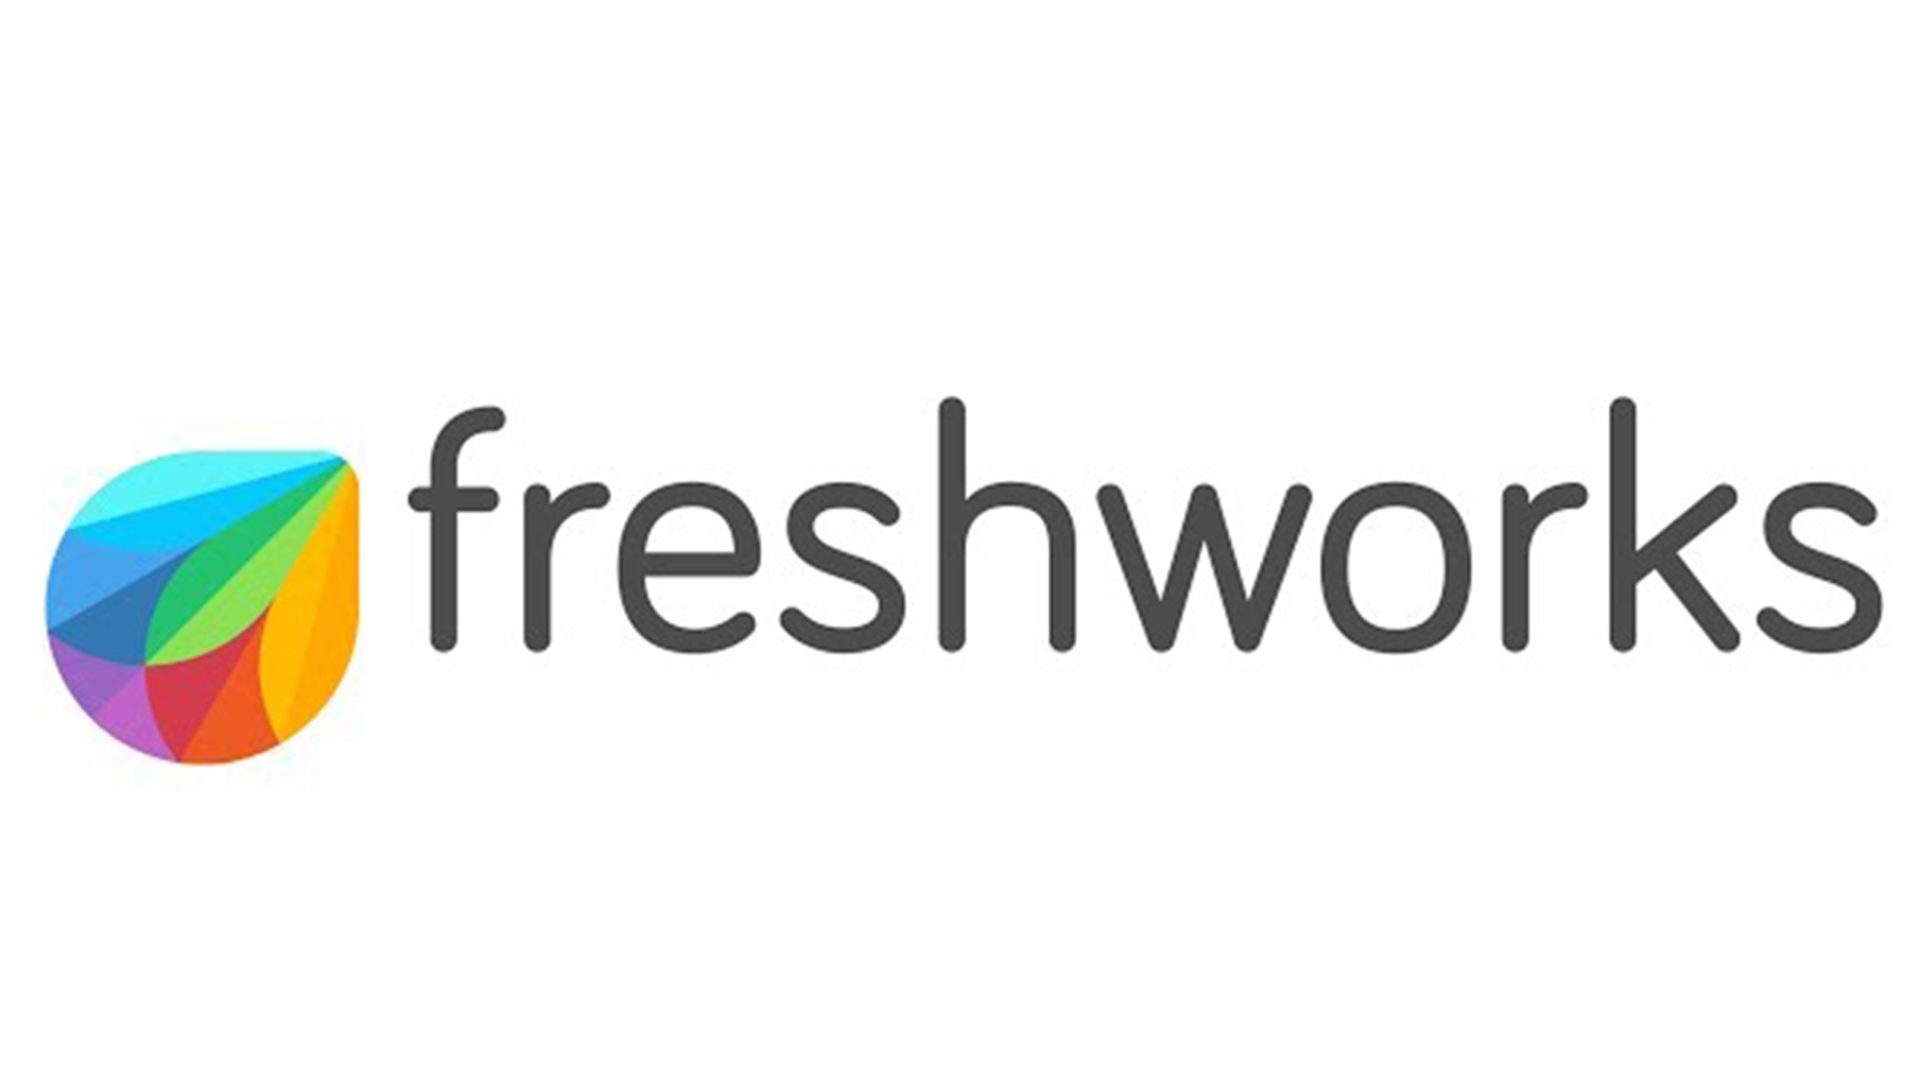 Freshwork acquires Flint for undisclosed sum Investocracy News